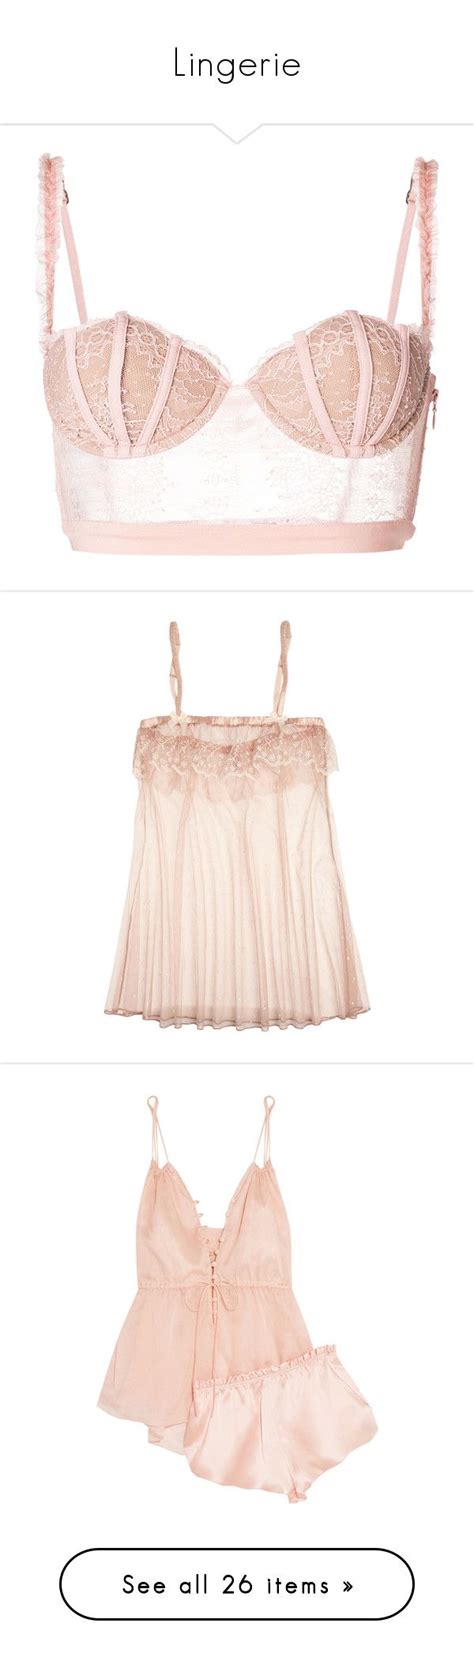 Lingerie By Erincastle Liked On Polyvore Featuring Intimates Bras